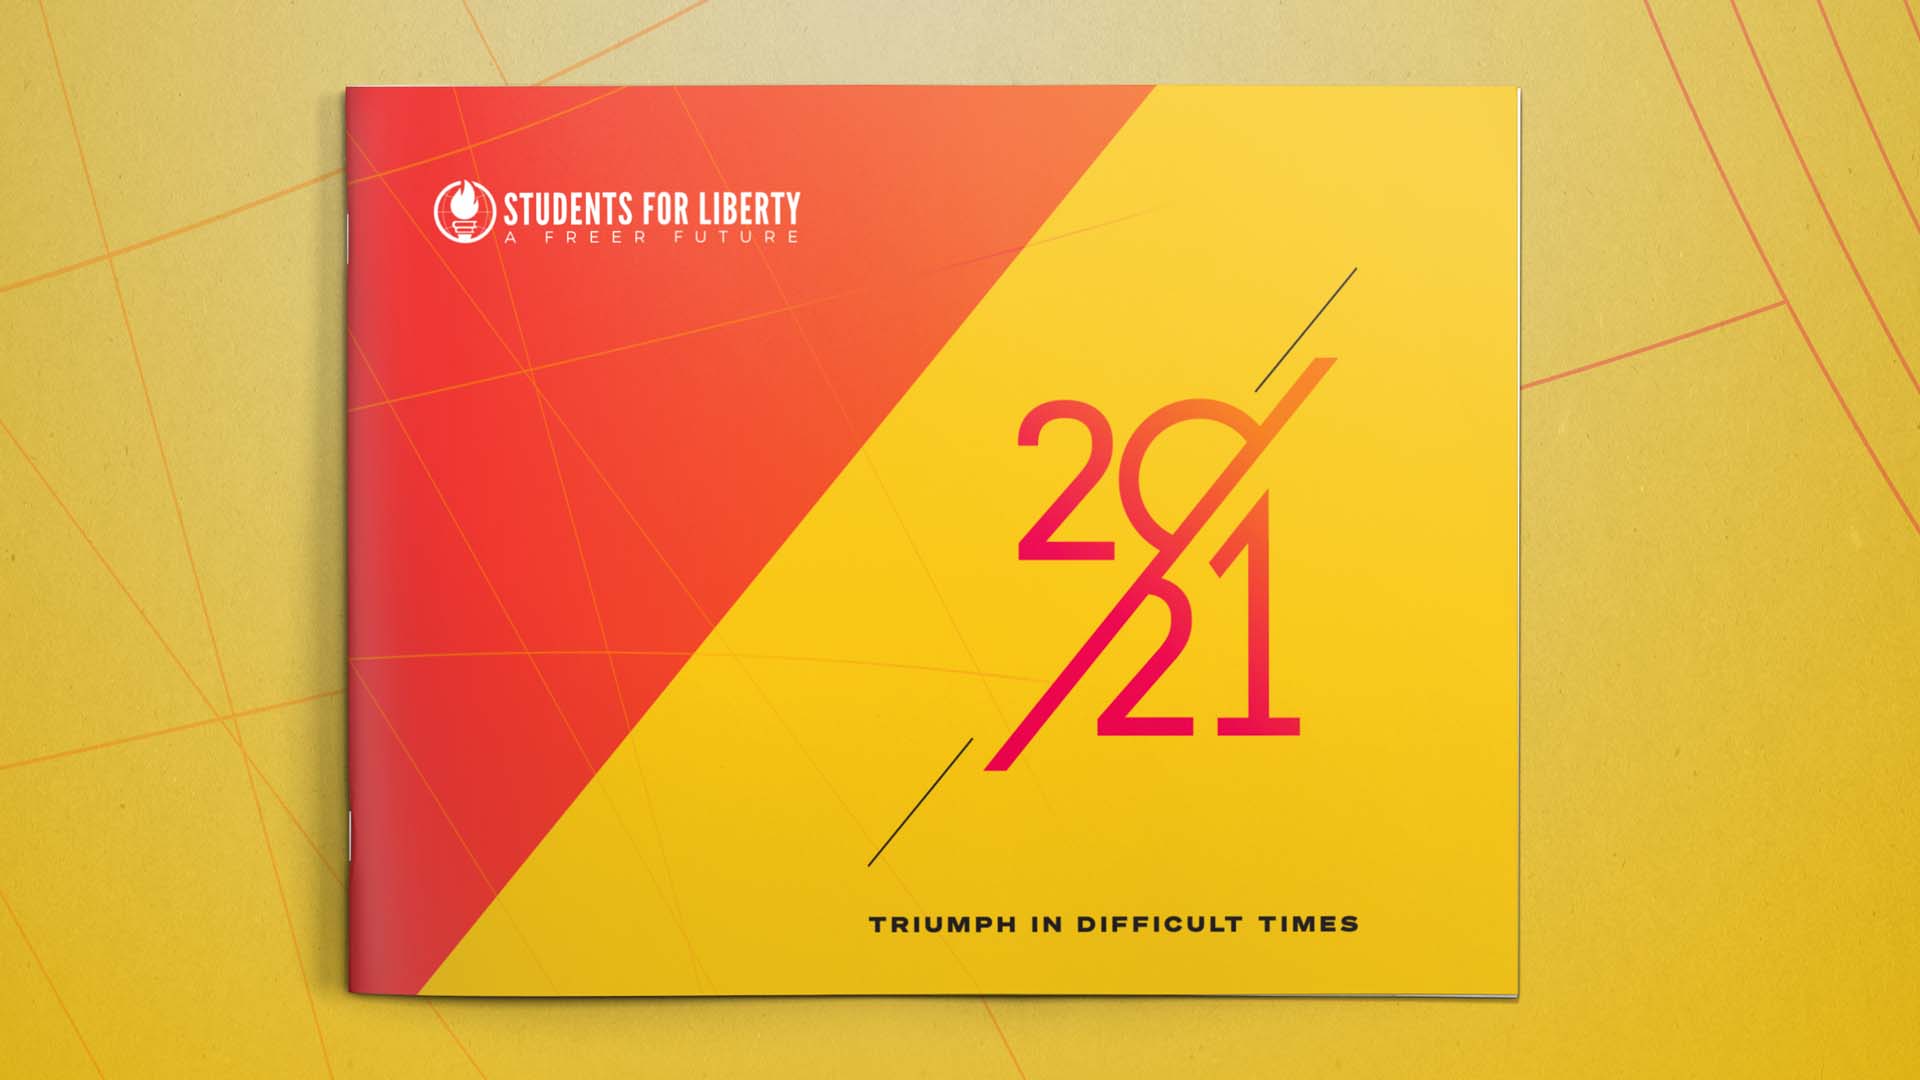 Students For Liberty highlights its efforts to spur stronger and more inclusive growth amid the pandemic in its 2021 Annual Report.